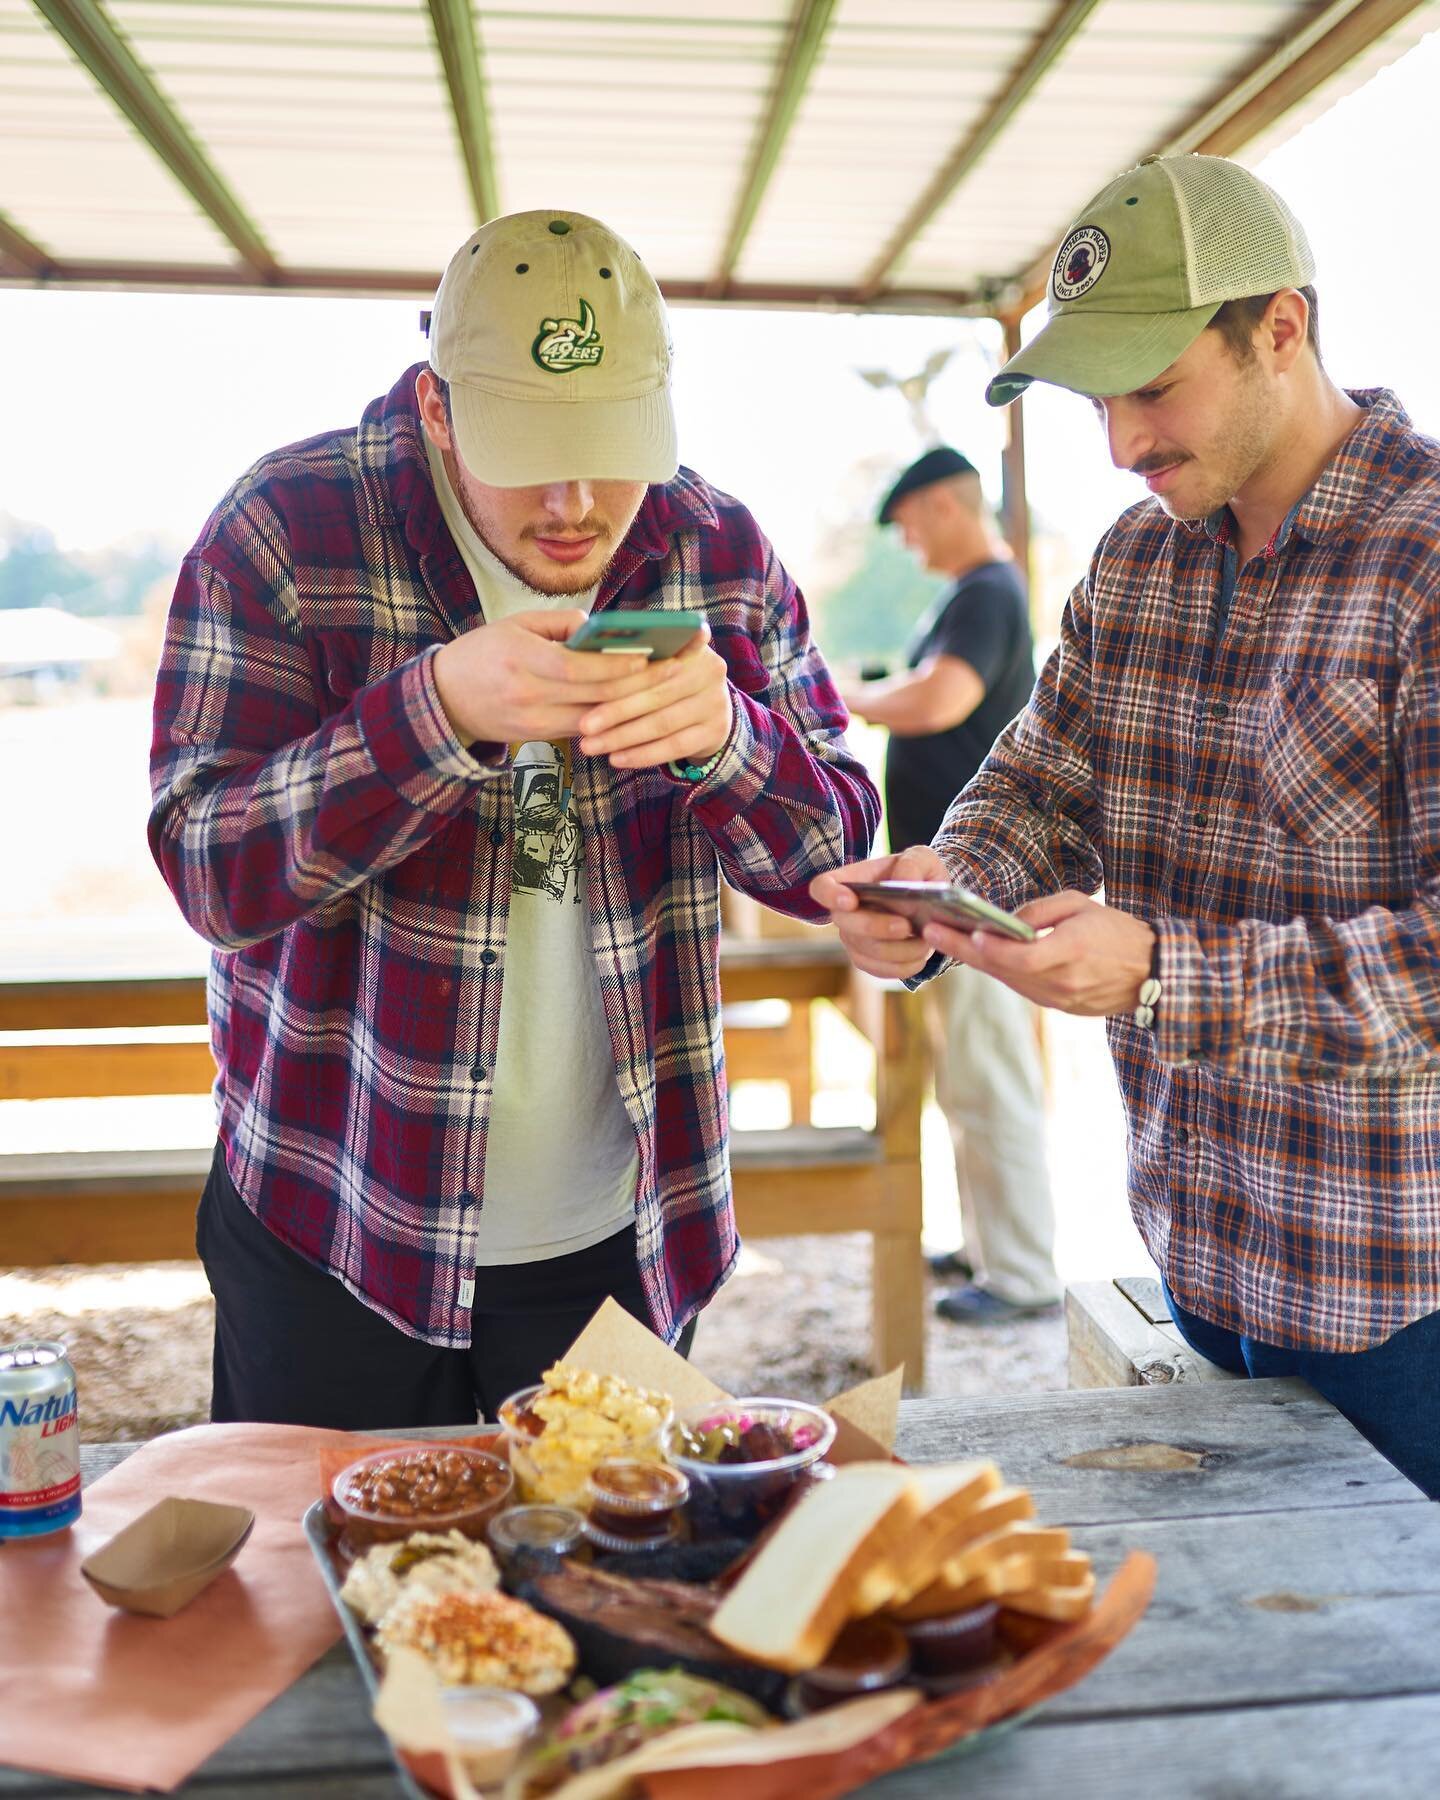 Phone eats first! 😋 

Come see us tomorrow, 11/5! @axedoods will be here so y&rsquo;all can throw some axes around while you &ldquo;tail-wait&rdquo;!

Of course we&rsquo;ve got all the goods! Kolaches, Beef ribs, bacon burnt ends, G&rsquo;s Burger T